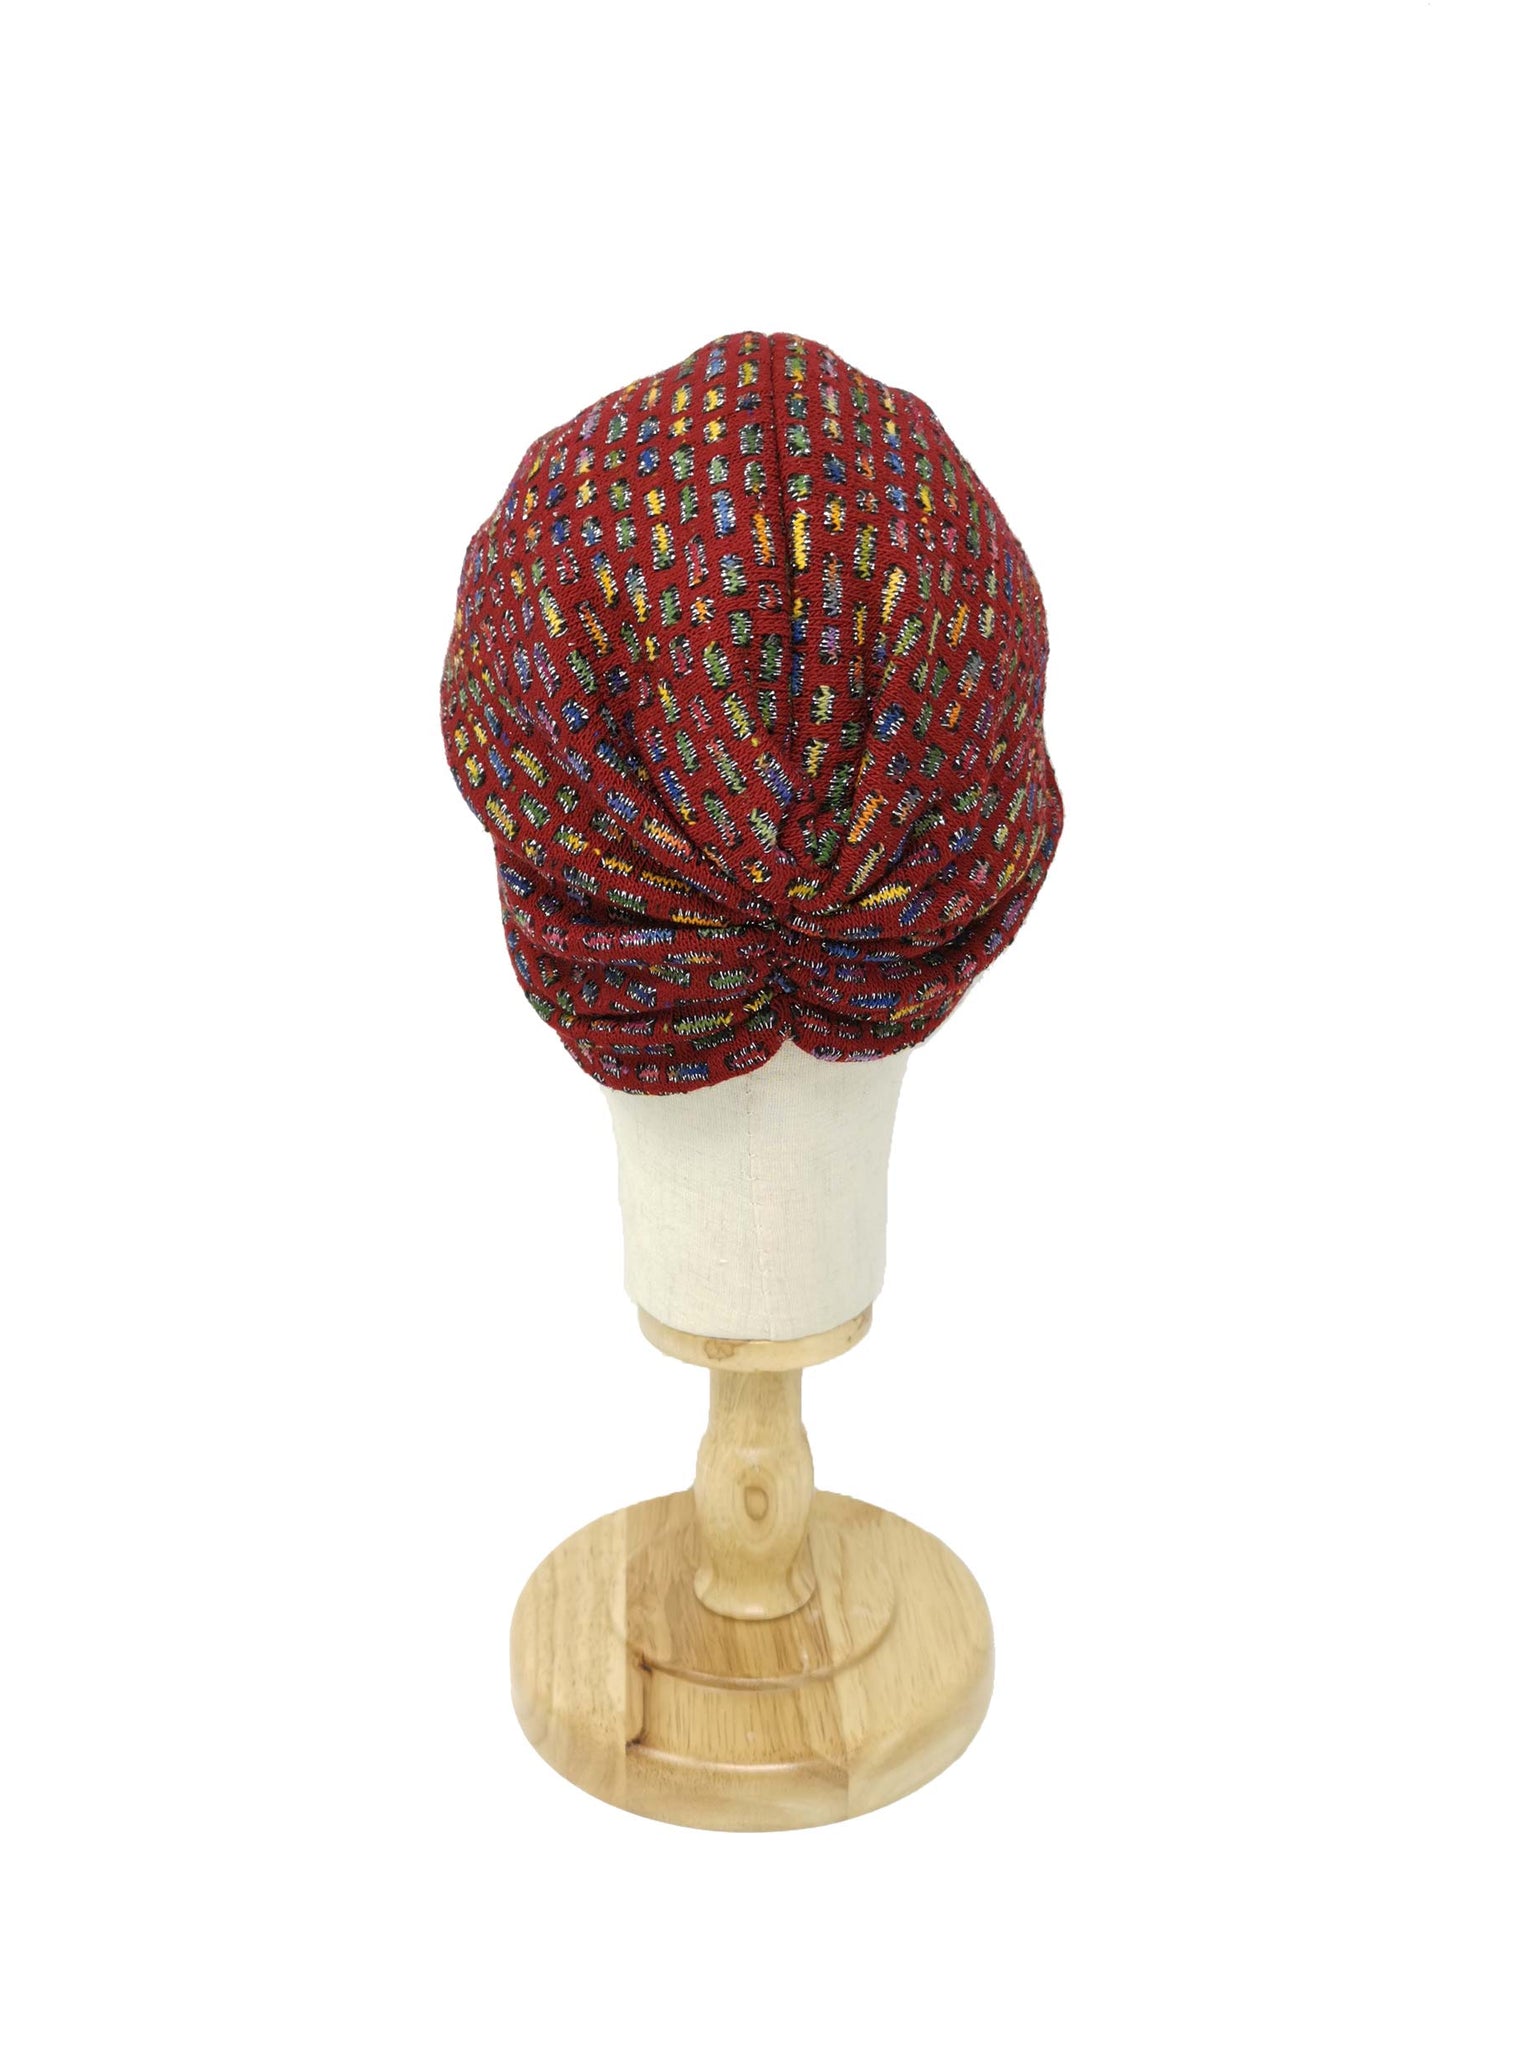 "Rose" burgundy and multicolored wool velvet with flat knot